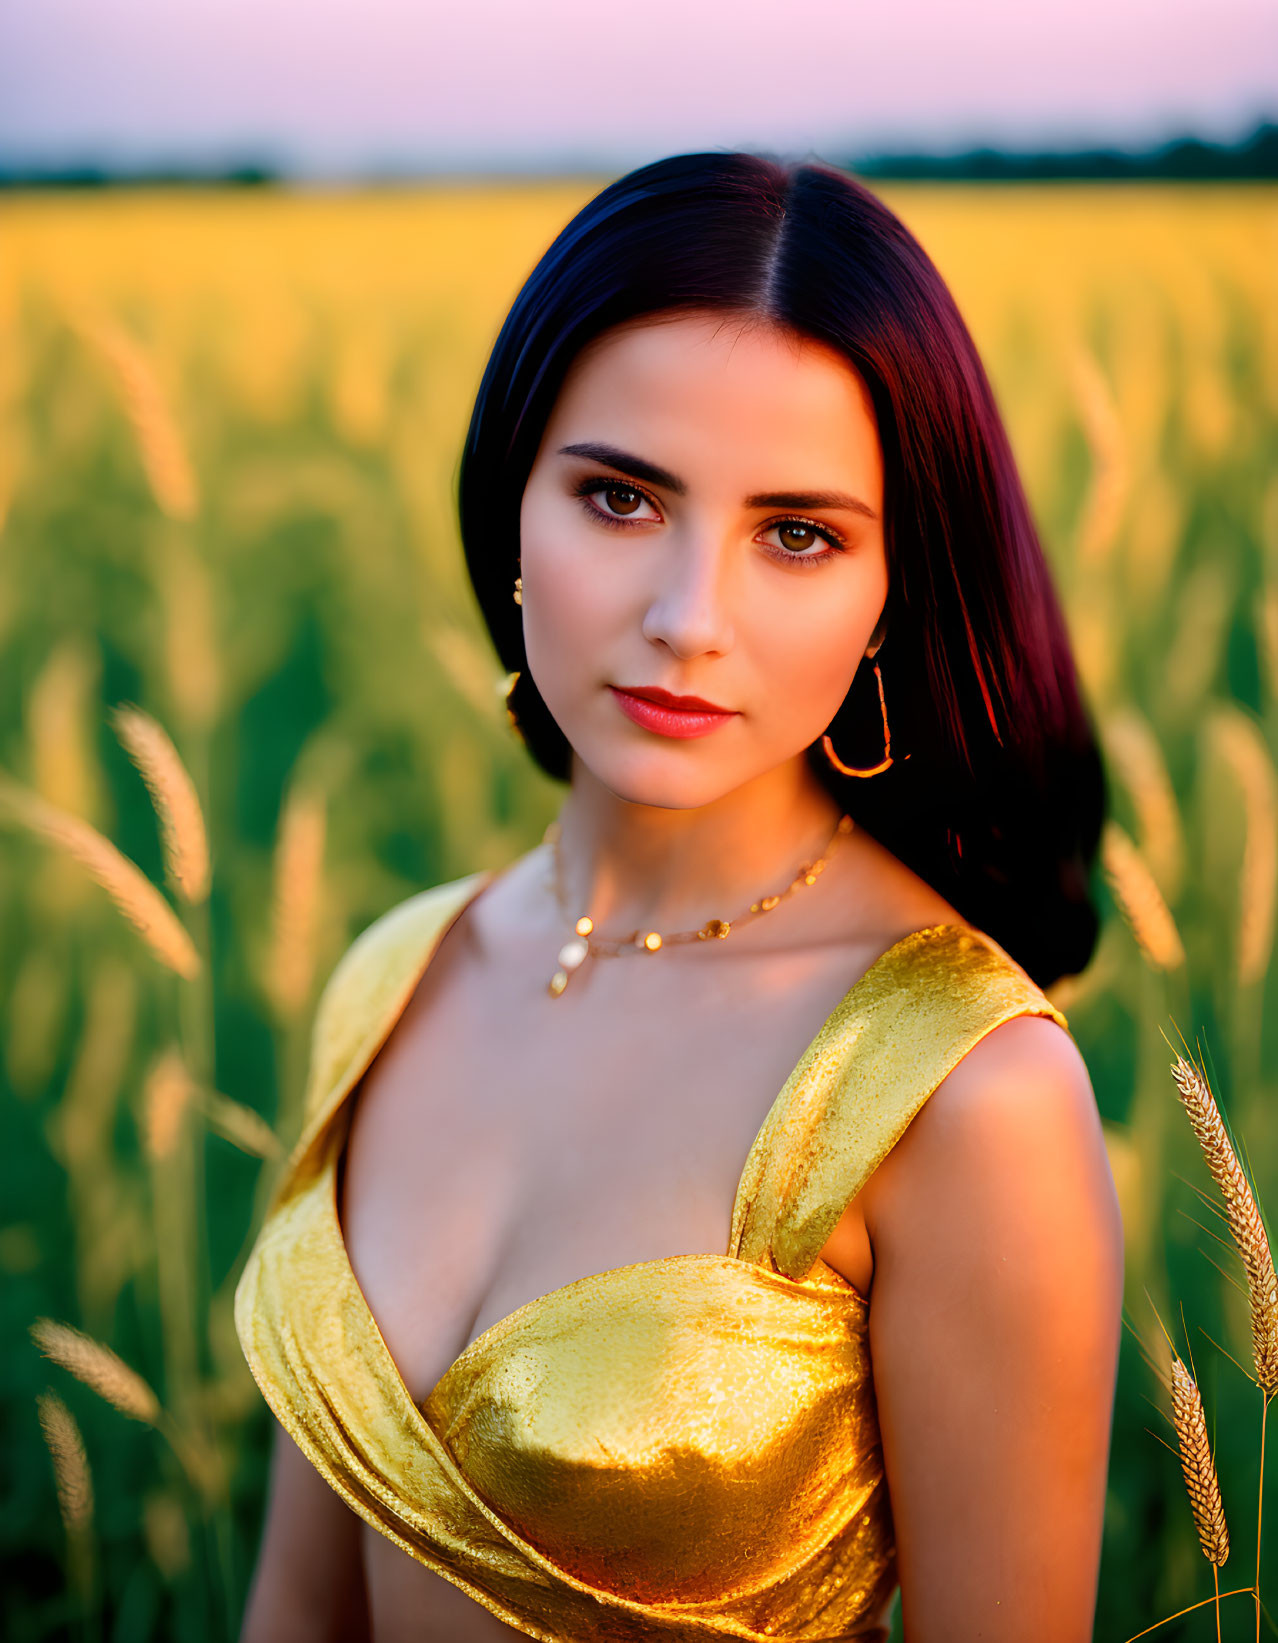 Dark-haired woman in golden top posing in sunset-lit field.